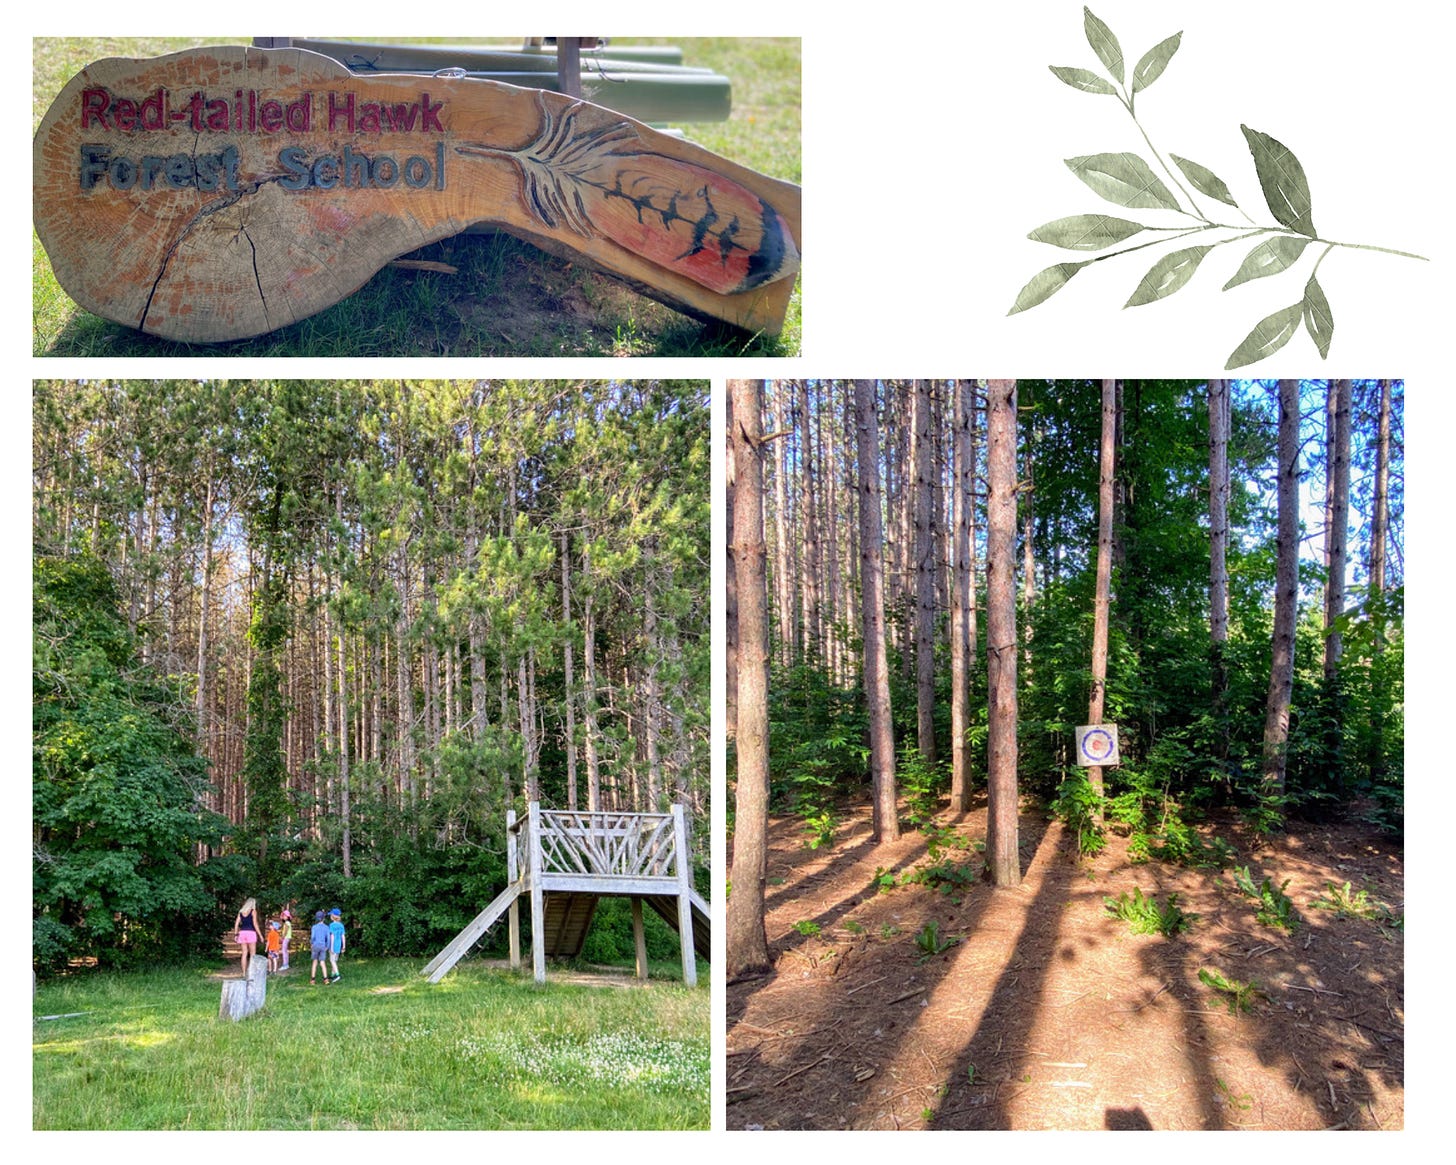 collage of 3 photos: a wood sign, children going into a stand of woods, and trees in a forest with a target hanging on one tree